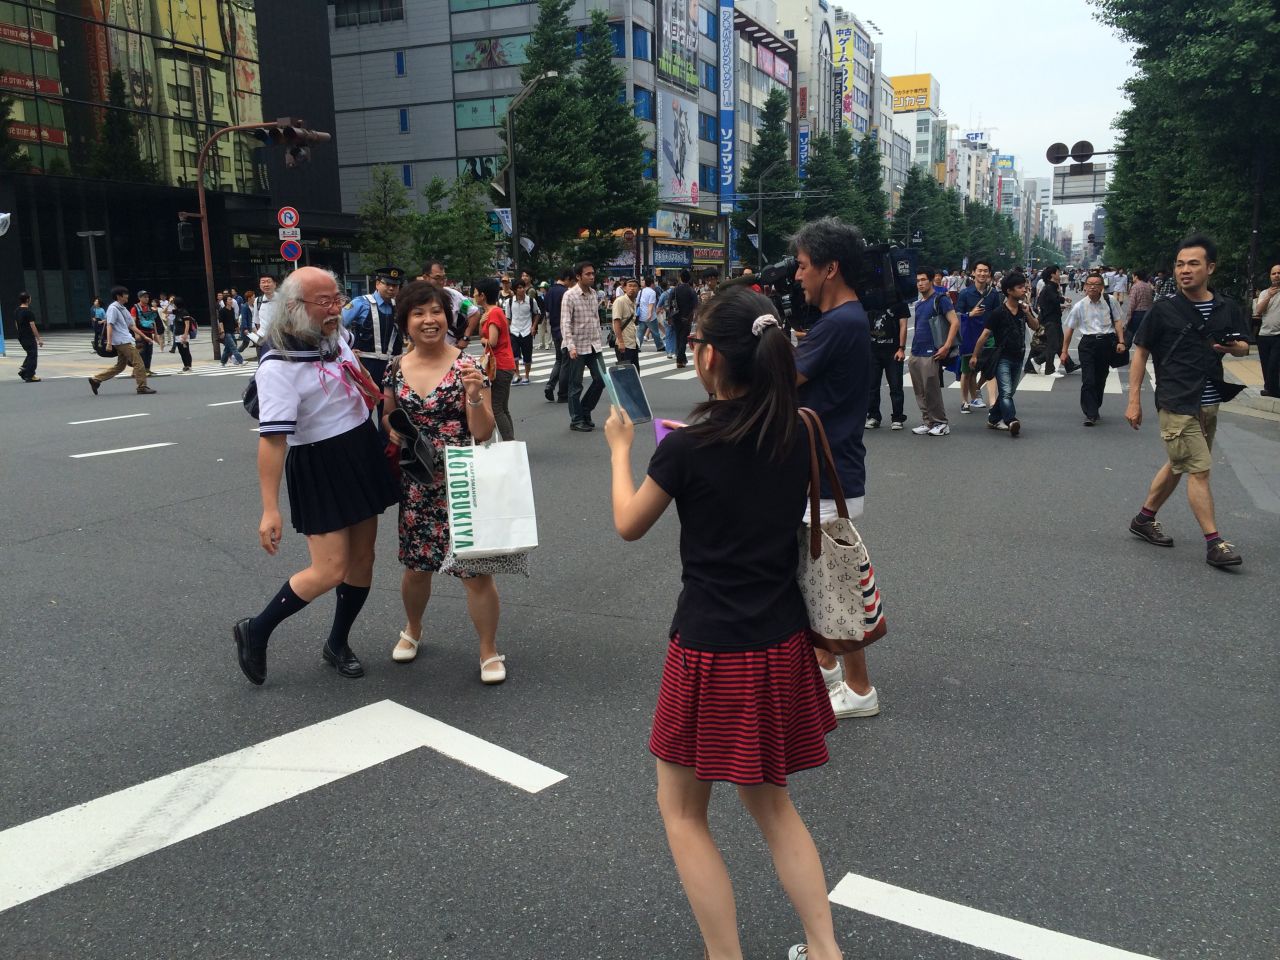 People are constantly asking Kobayashi to pose for pictures and he rarely says no.  Sometimes a 15-minute walk can take two hours, he says. Pictures shared on social media have made him famous.